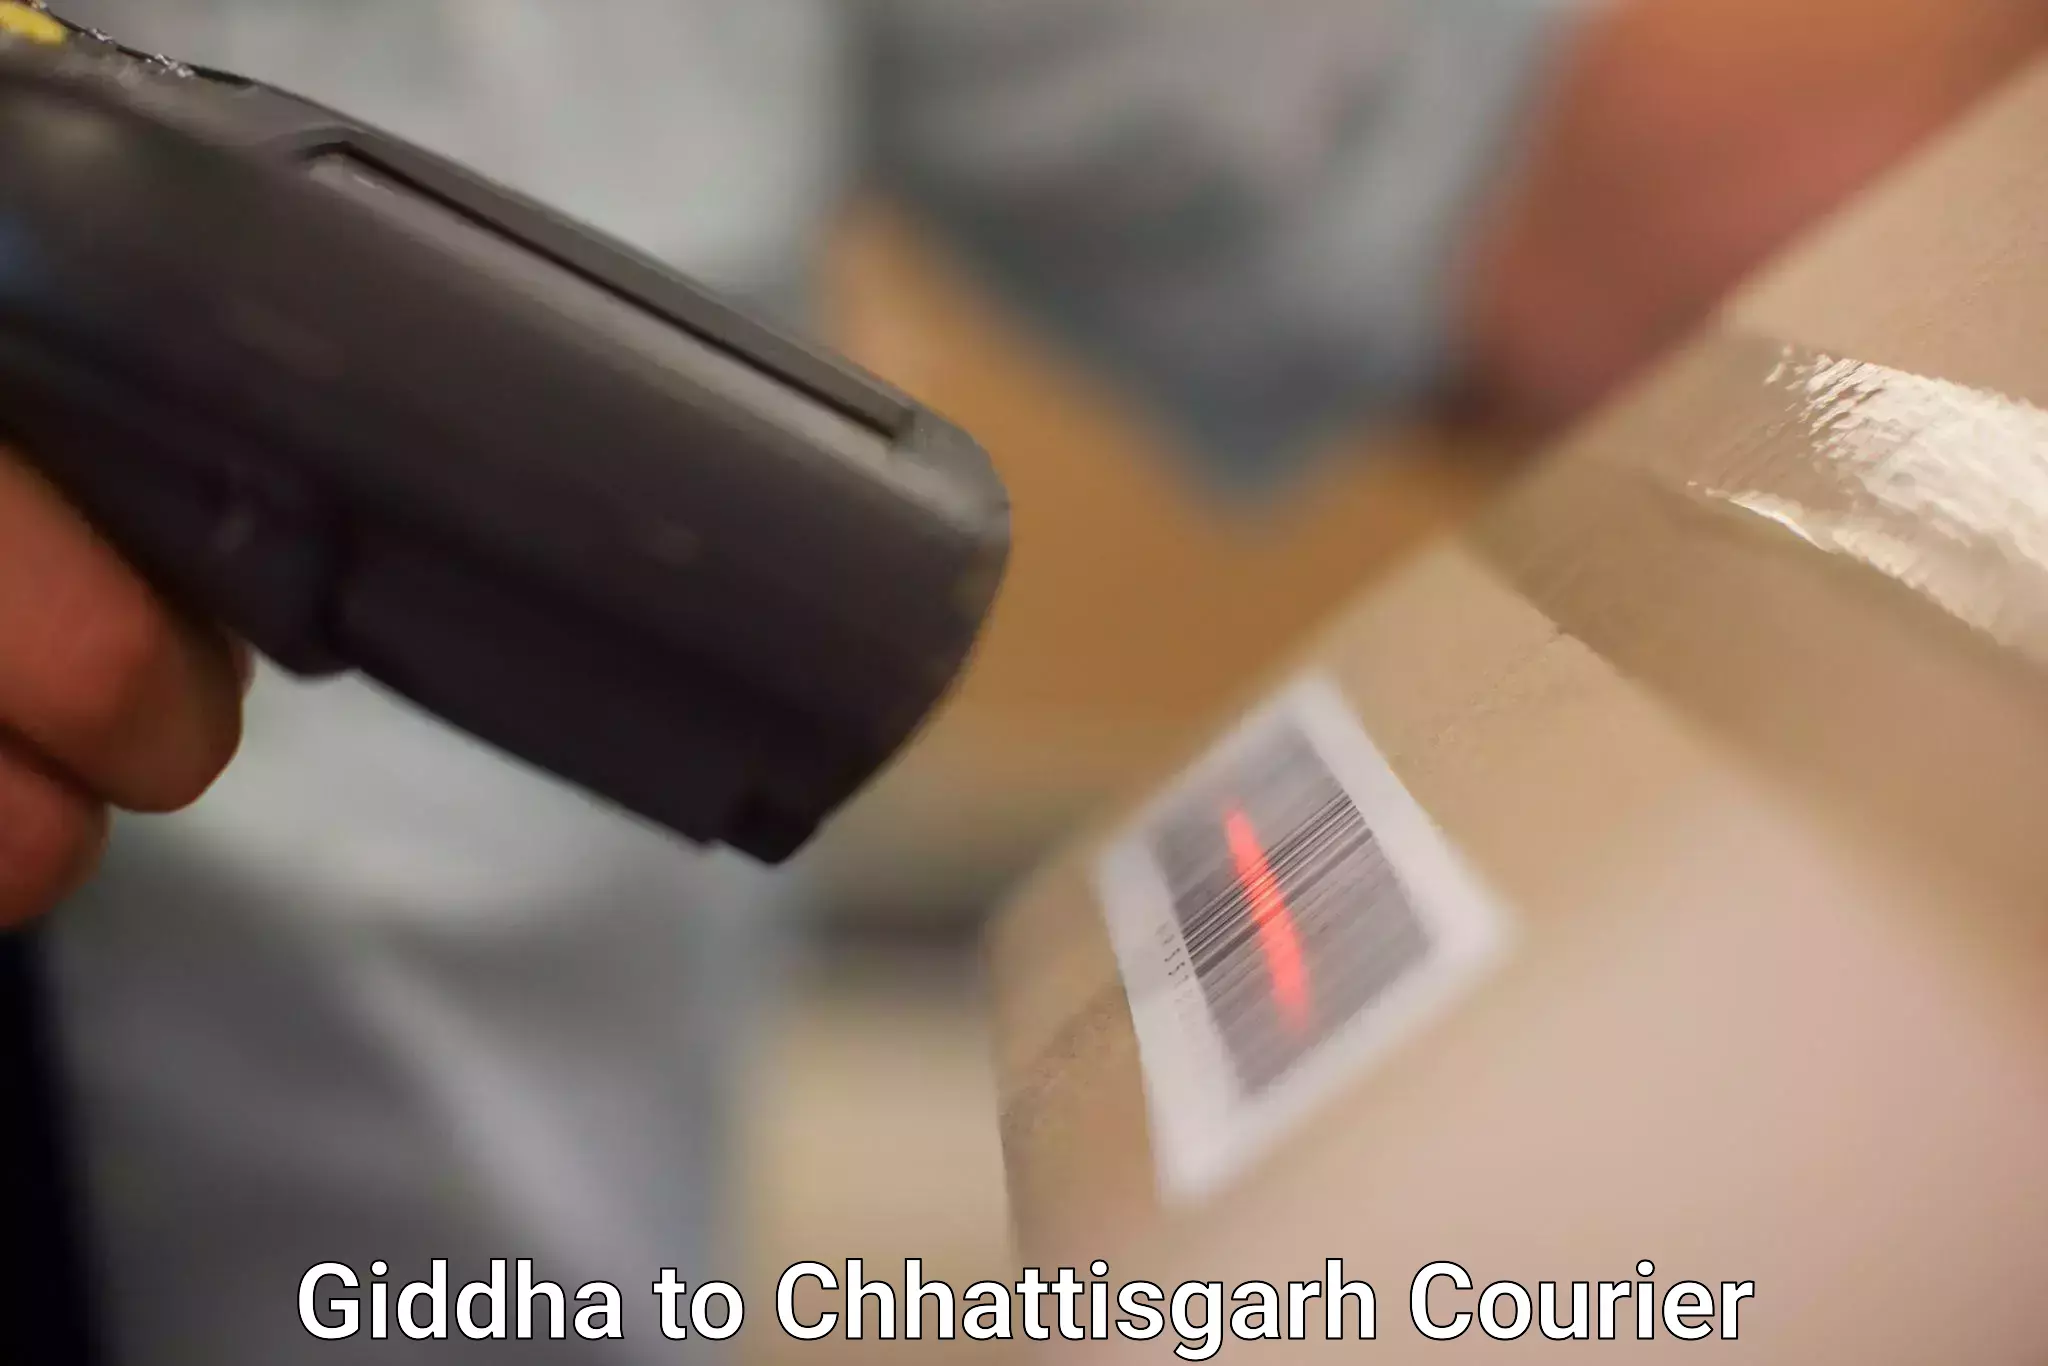 Courier service efficiency in Giddha to Charama